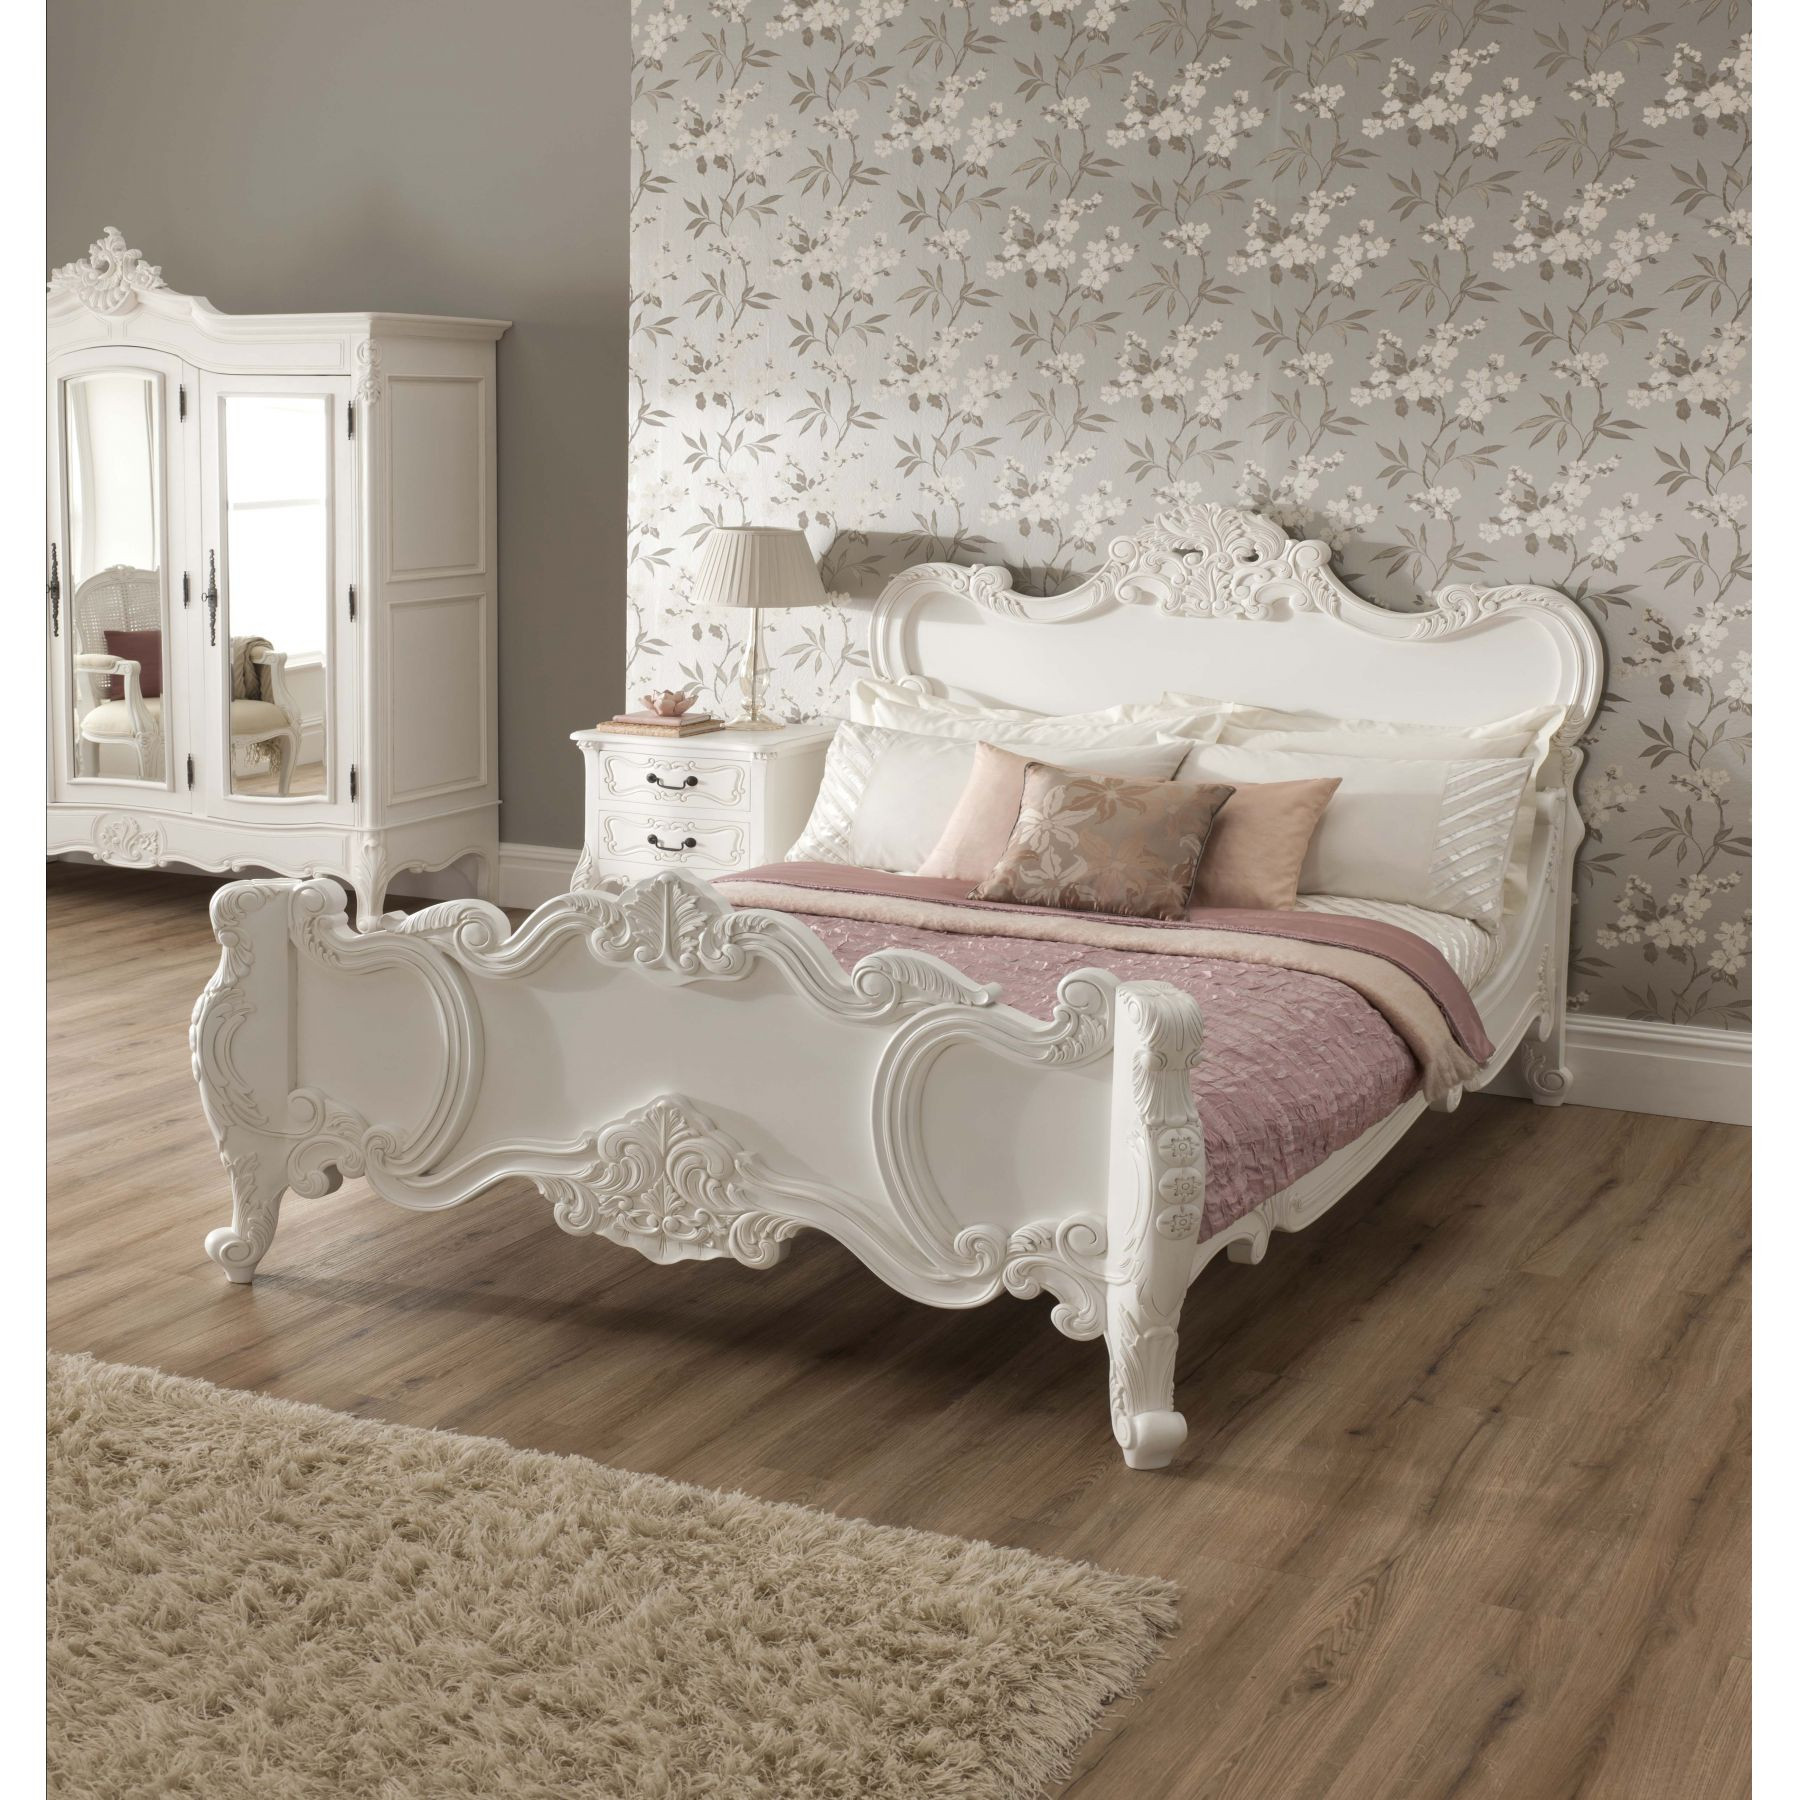 French Shabby Chic Bedroom Ideas
 Vintage Your Room with 9 Shabby Chic Bedroom Furniture